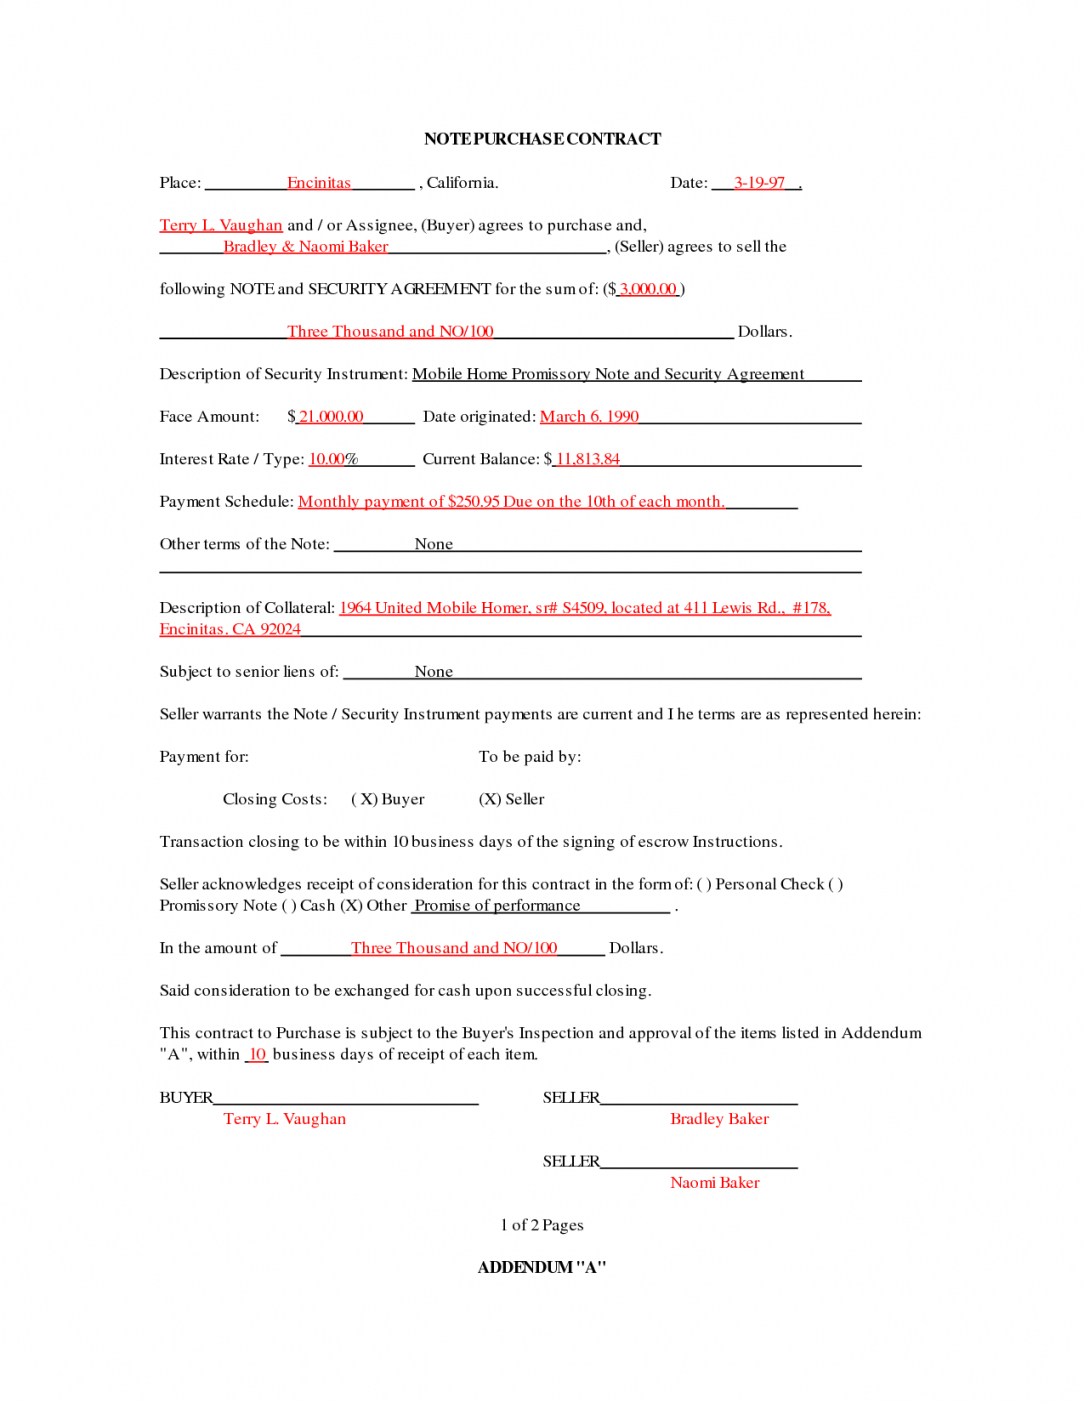 Simple Home Purchase Agreement 020 Template Ideas Simple Purchase Agreement Mobile Home Images Of